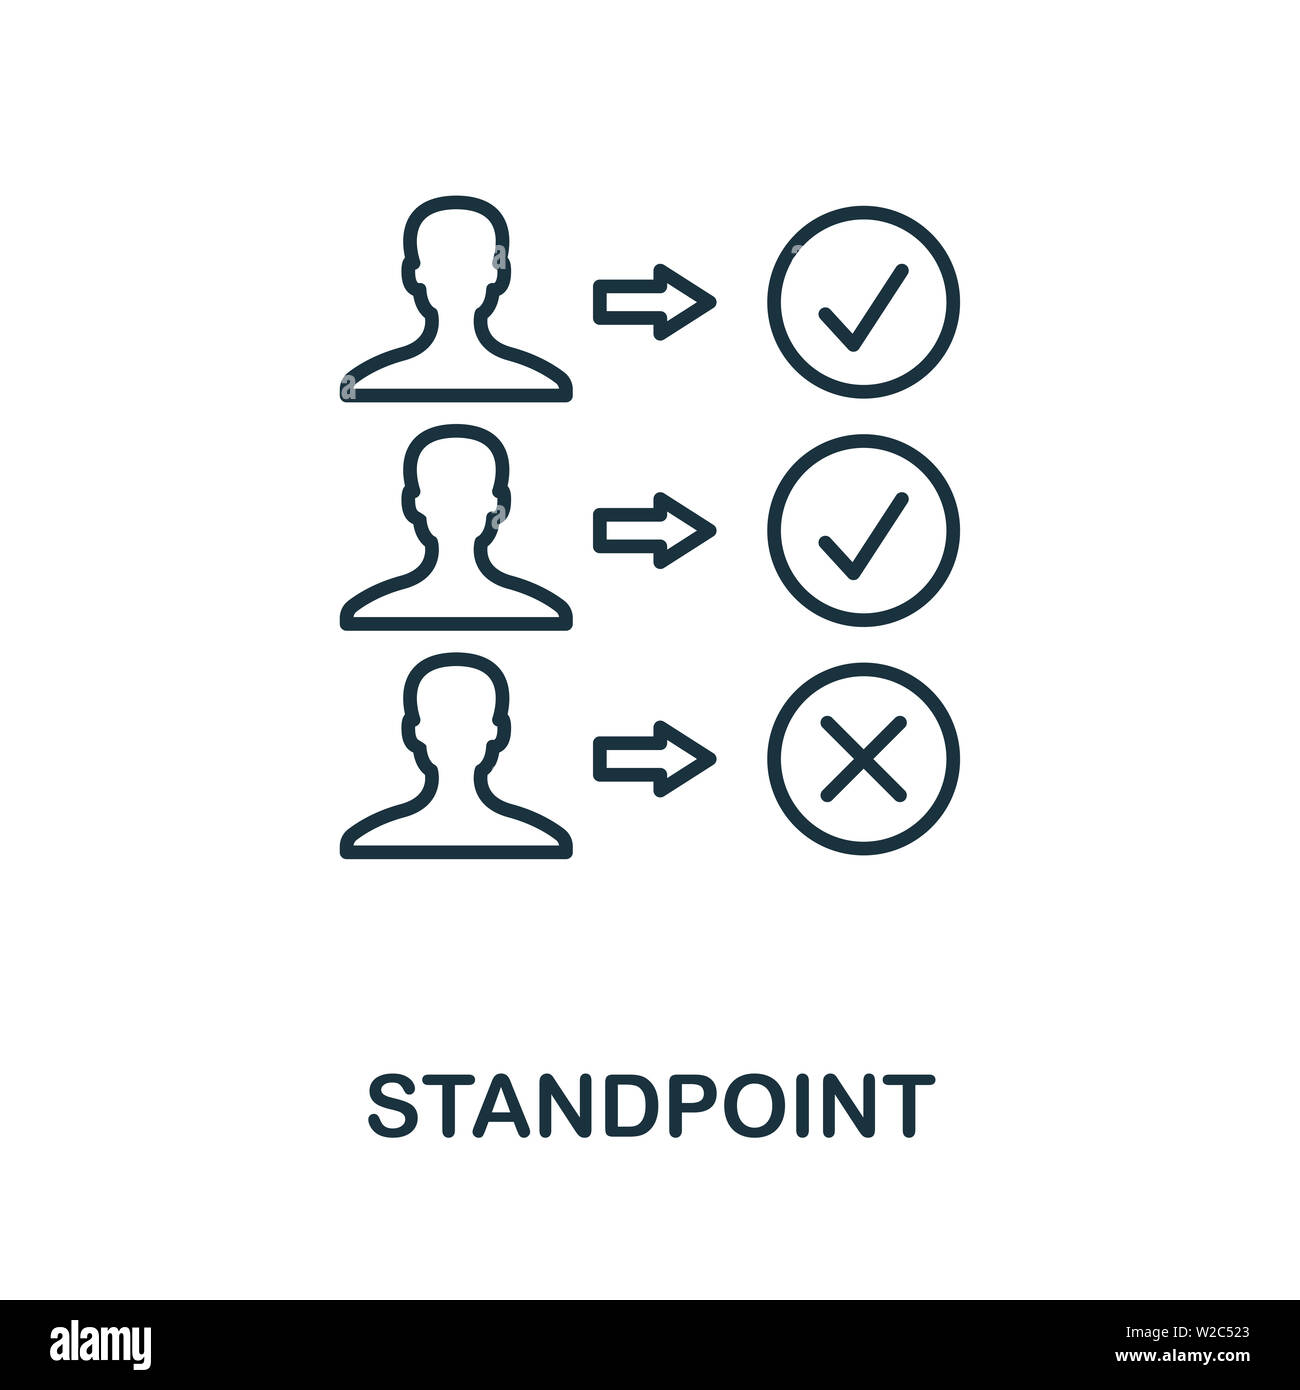 Standpoint outline icon. Thin line concept element from business management icons collection. Creative Standpoint icon for mobile apps and web usage Stock Photo